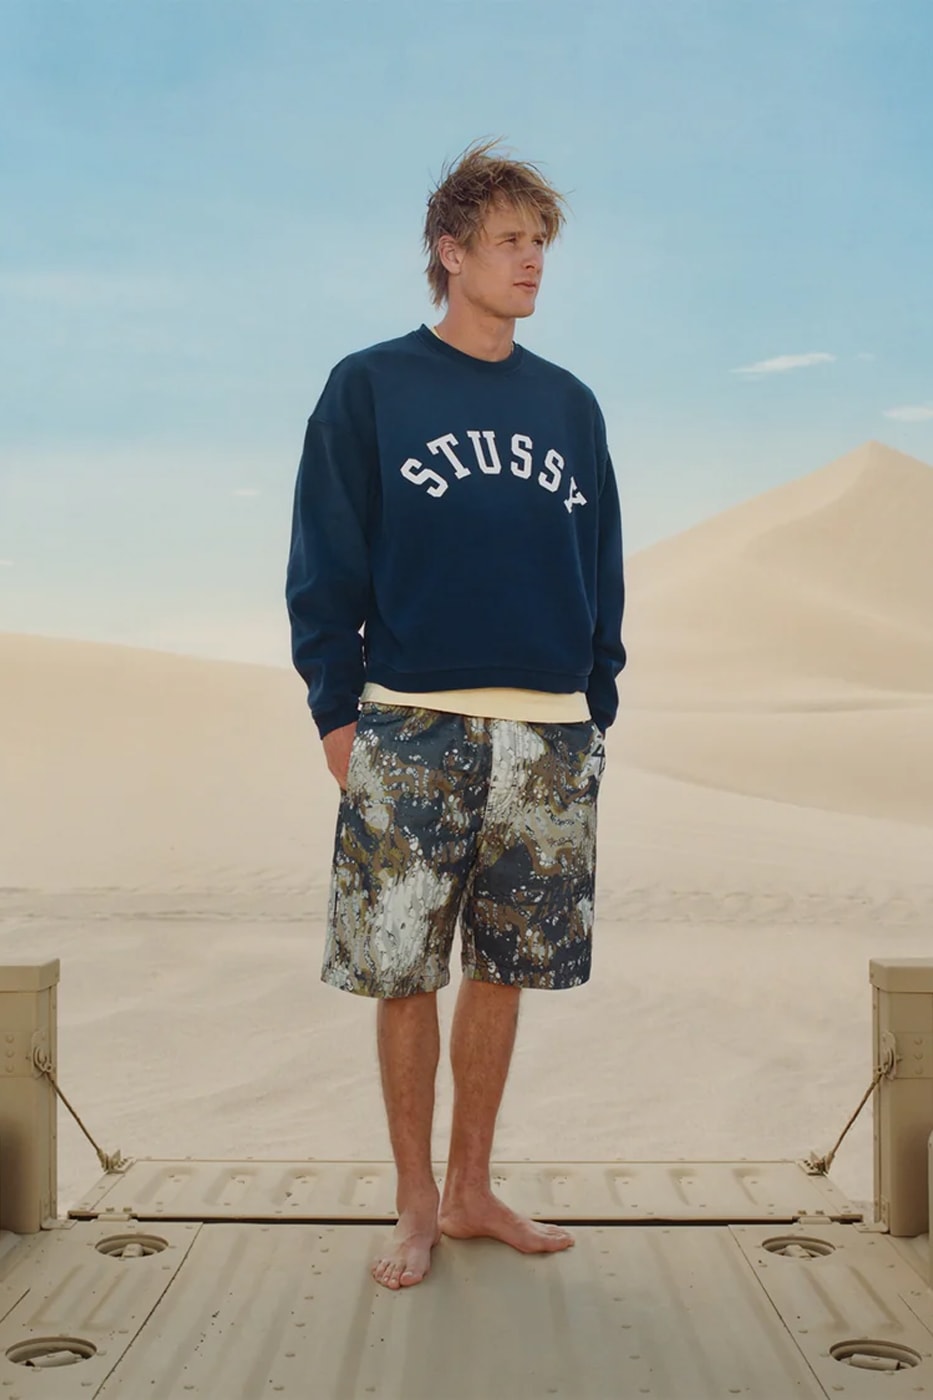 stussy summer seaside tops tshirts tracksuits clothes beach